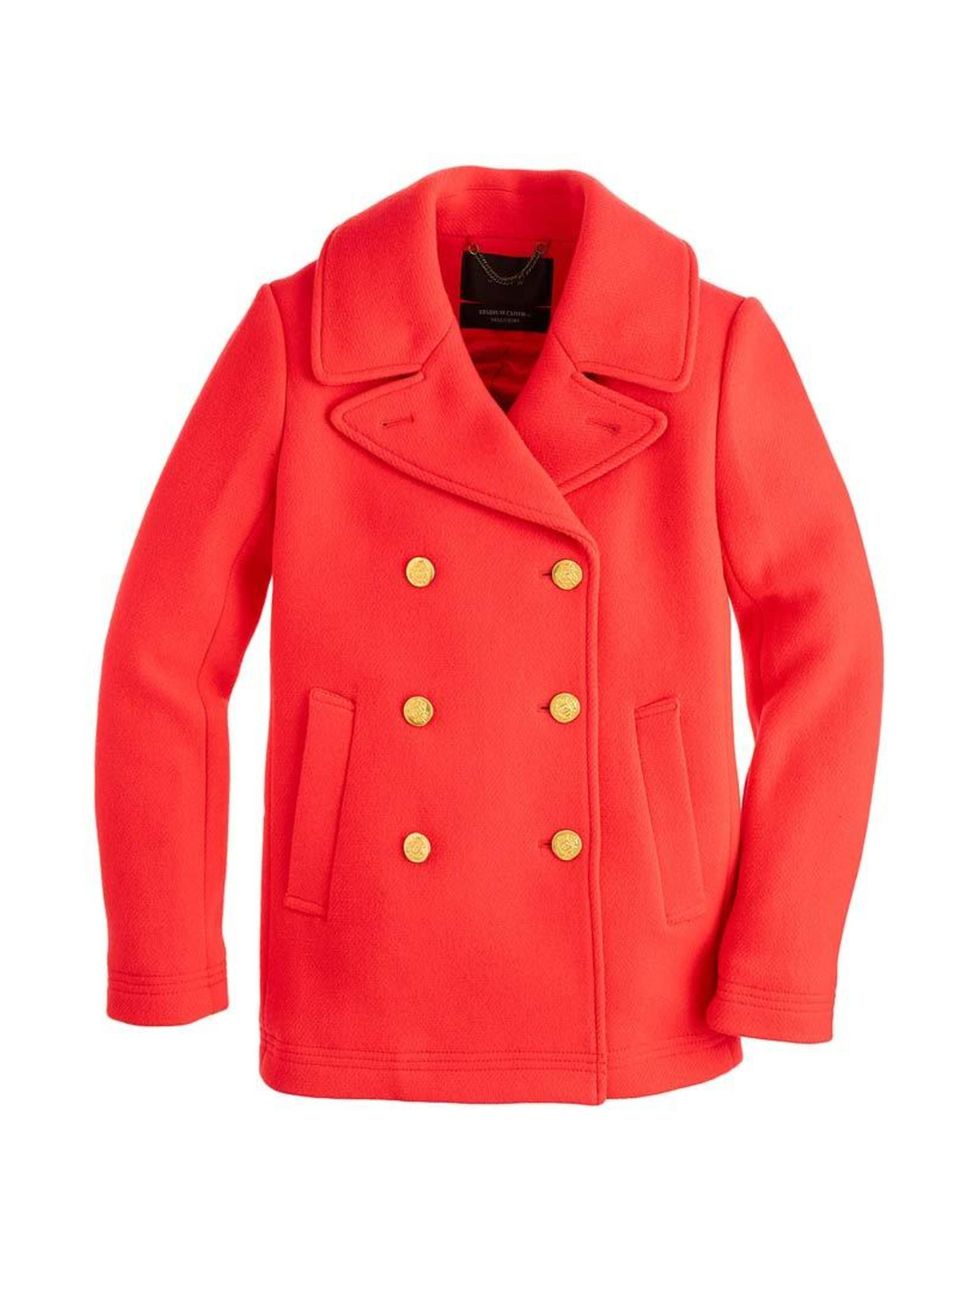 <p>Chase away the January blues with fire-engine red.</p>

<p><a href="https://www.jcrew.com/uk/womens_category/outerwear/wool/PRD~49360/49360.jsp" target="_blank">J.Crew</a> coat, £298</p>